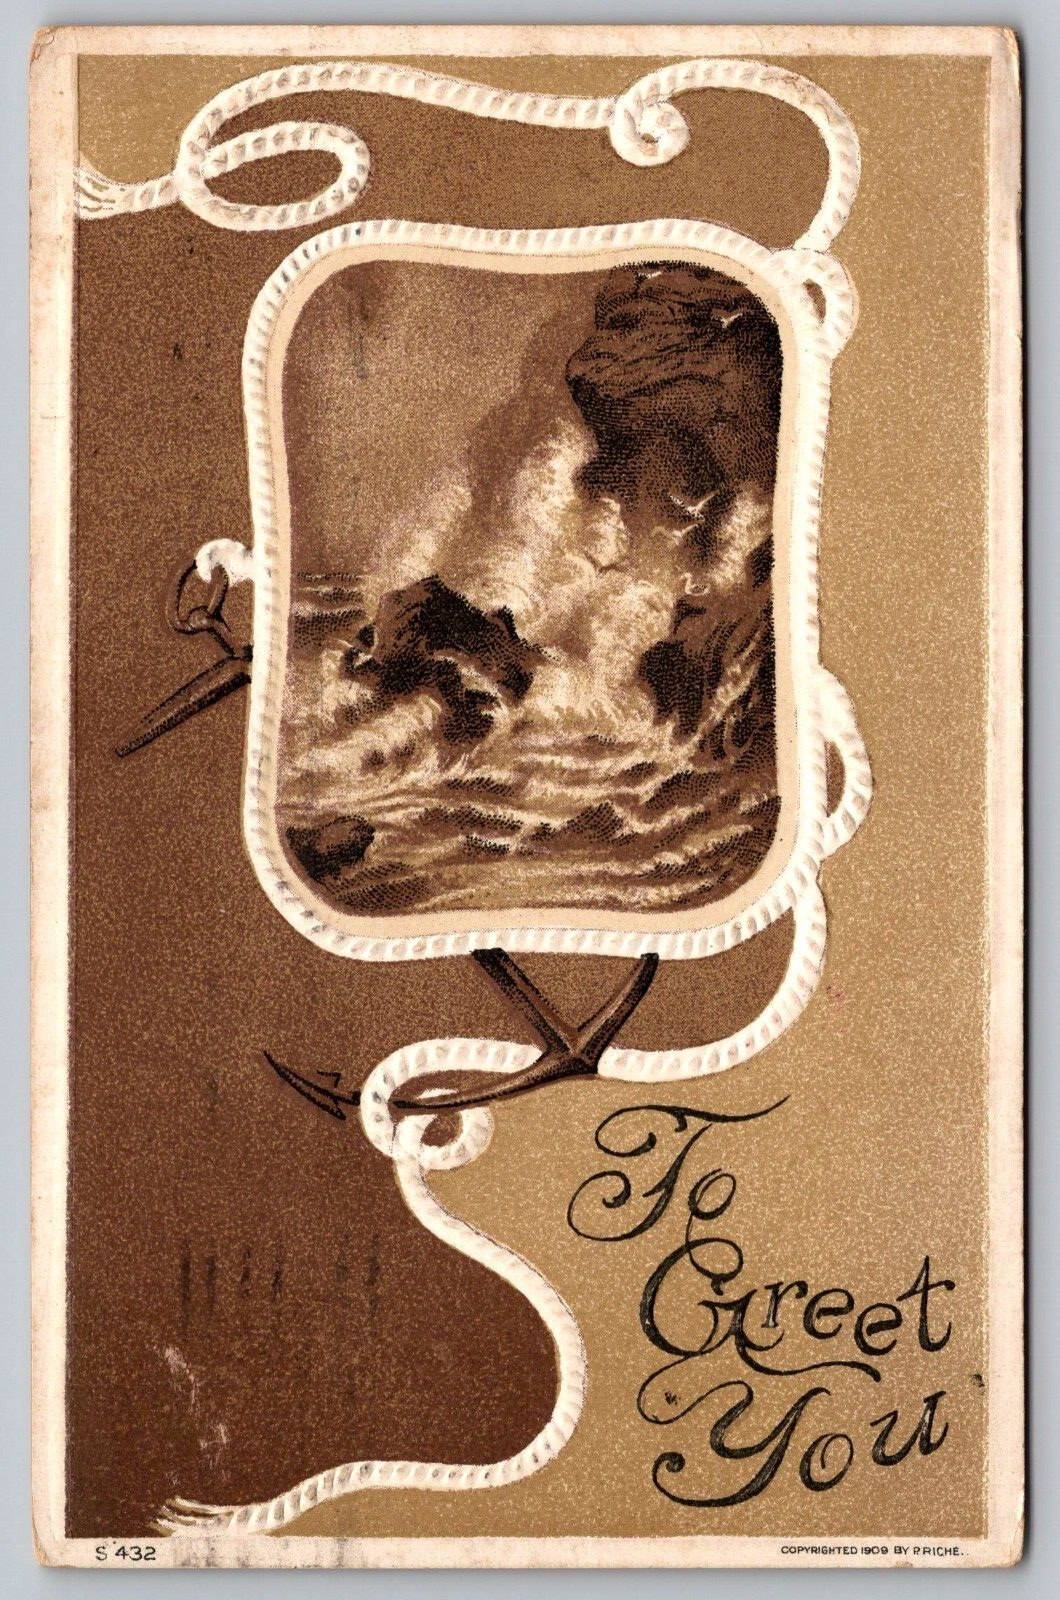 Postcard Greetings Card To Greet You Ocean Themed W/Anchor On Rope VTG c1911  I5